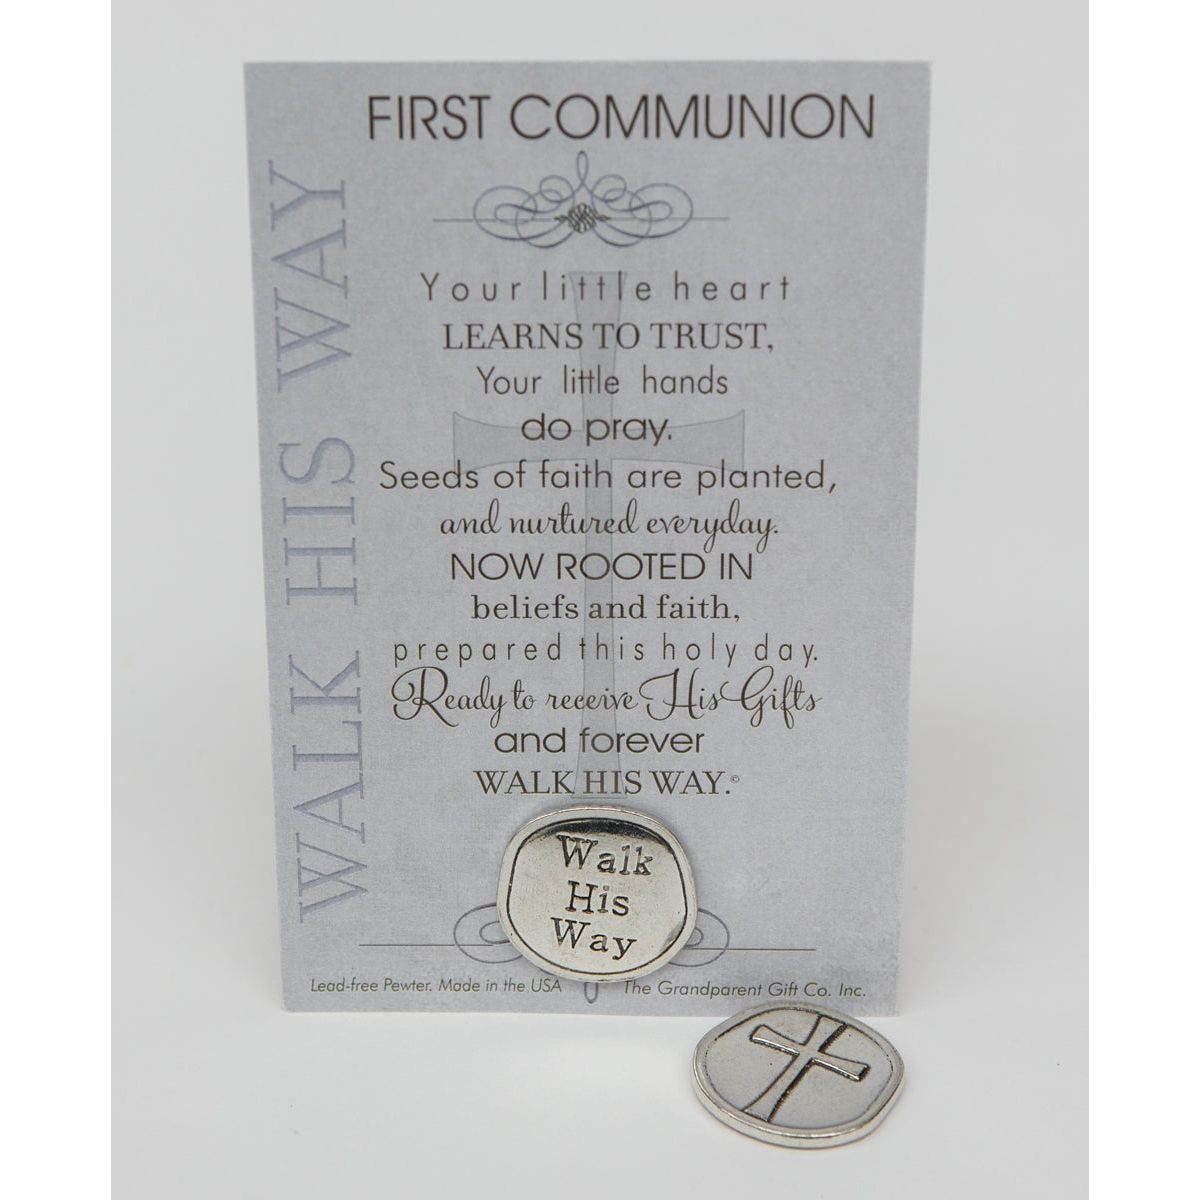 First Communion Gift: Handmade pewter coin with &quot;Walk His Way&quot; on one side and a cross on the other, packaged in a clear bag with &quot;First Communion&quot; poem.